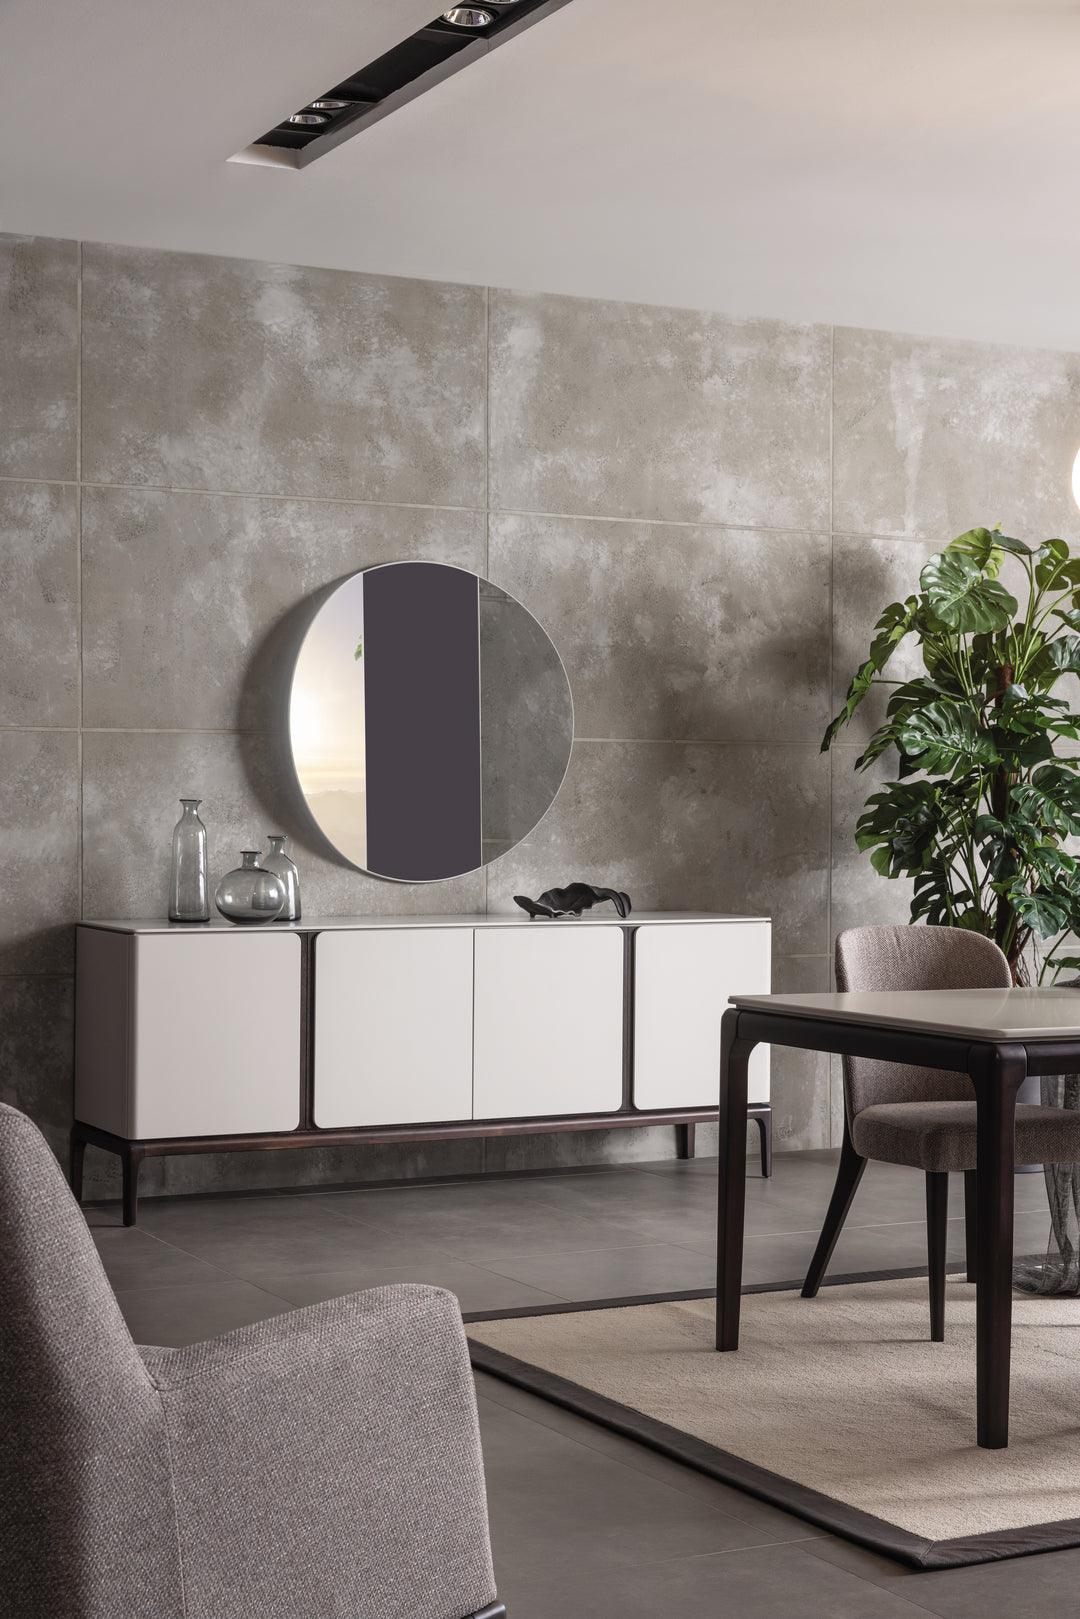 Lucca Sideboard